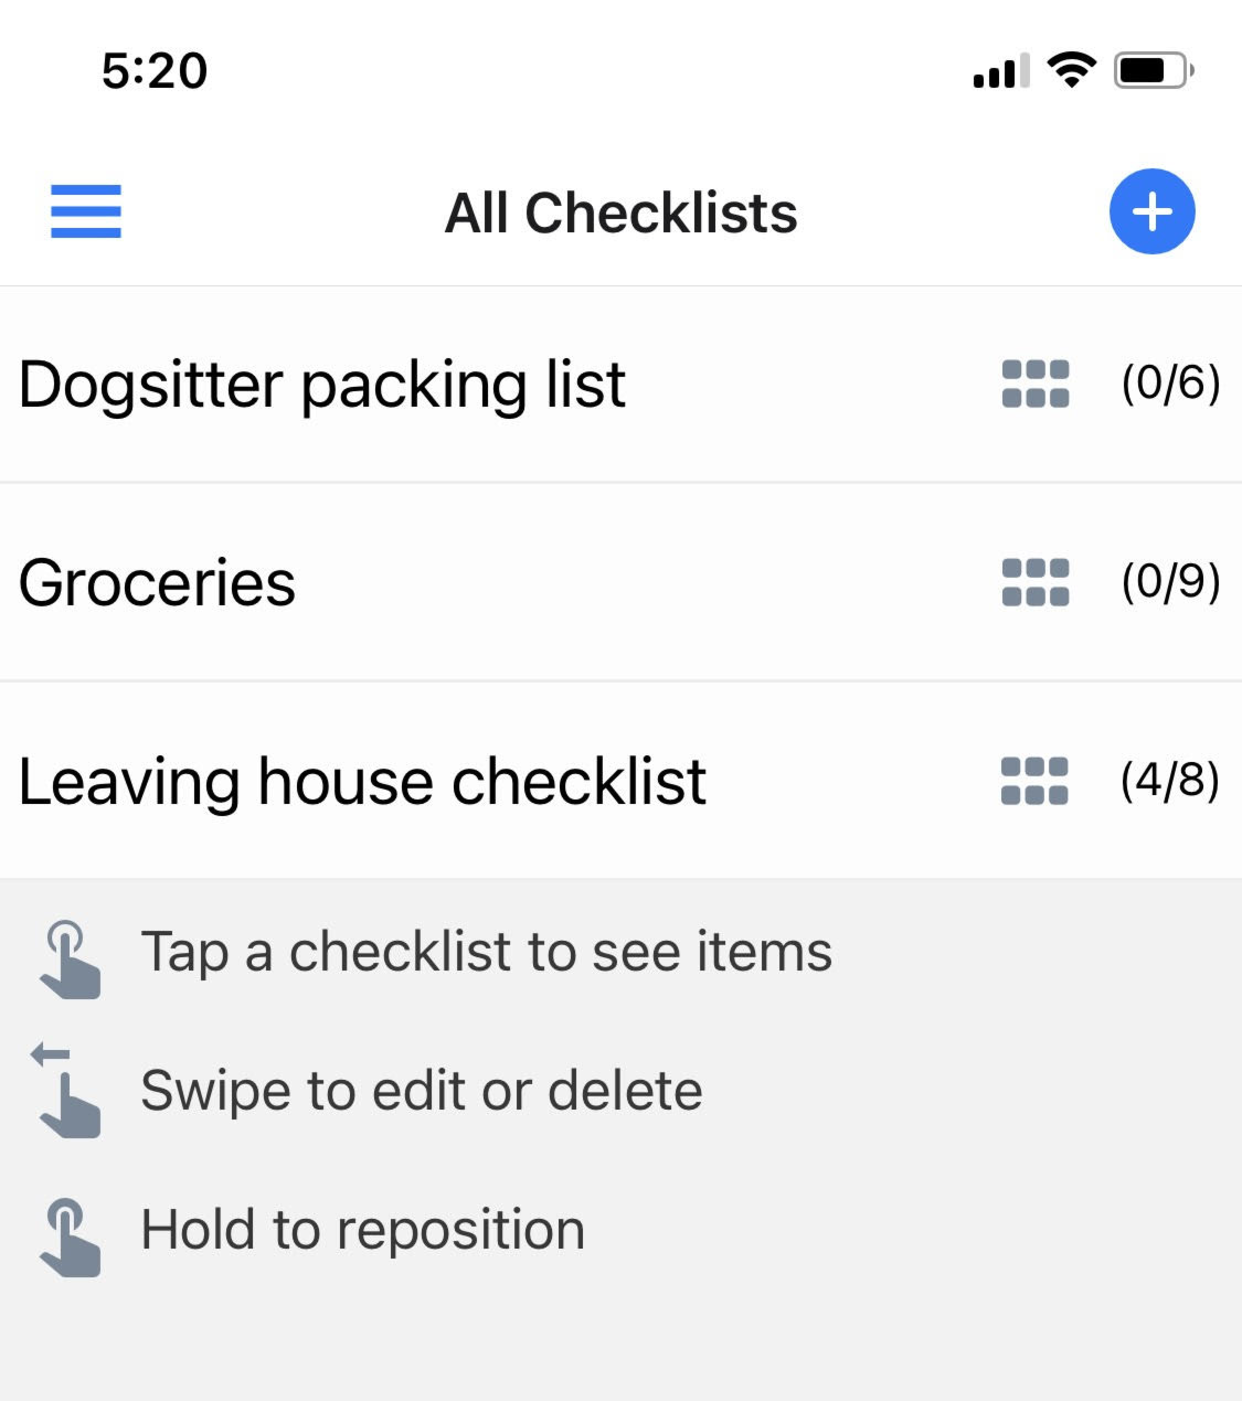 Screenshot showing a checklist with two buttons at the bottom that allow you to reset the checklist or pin uncompleted items to the top of the list.